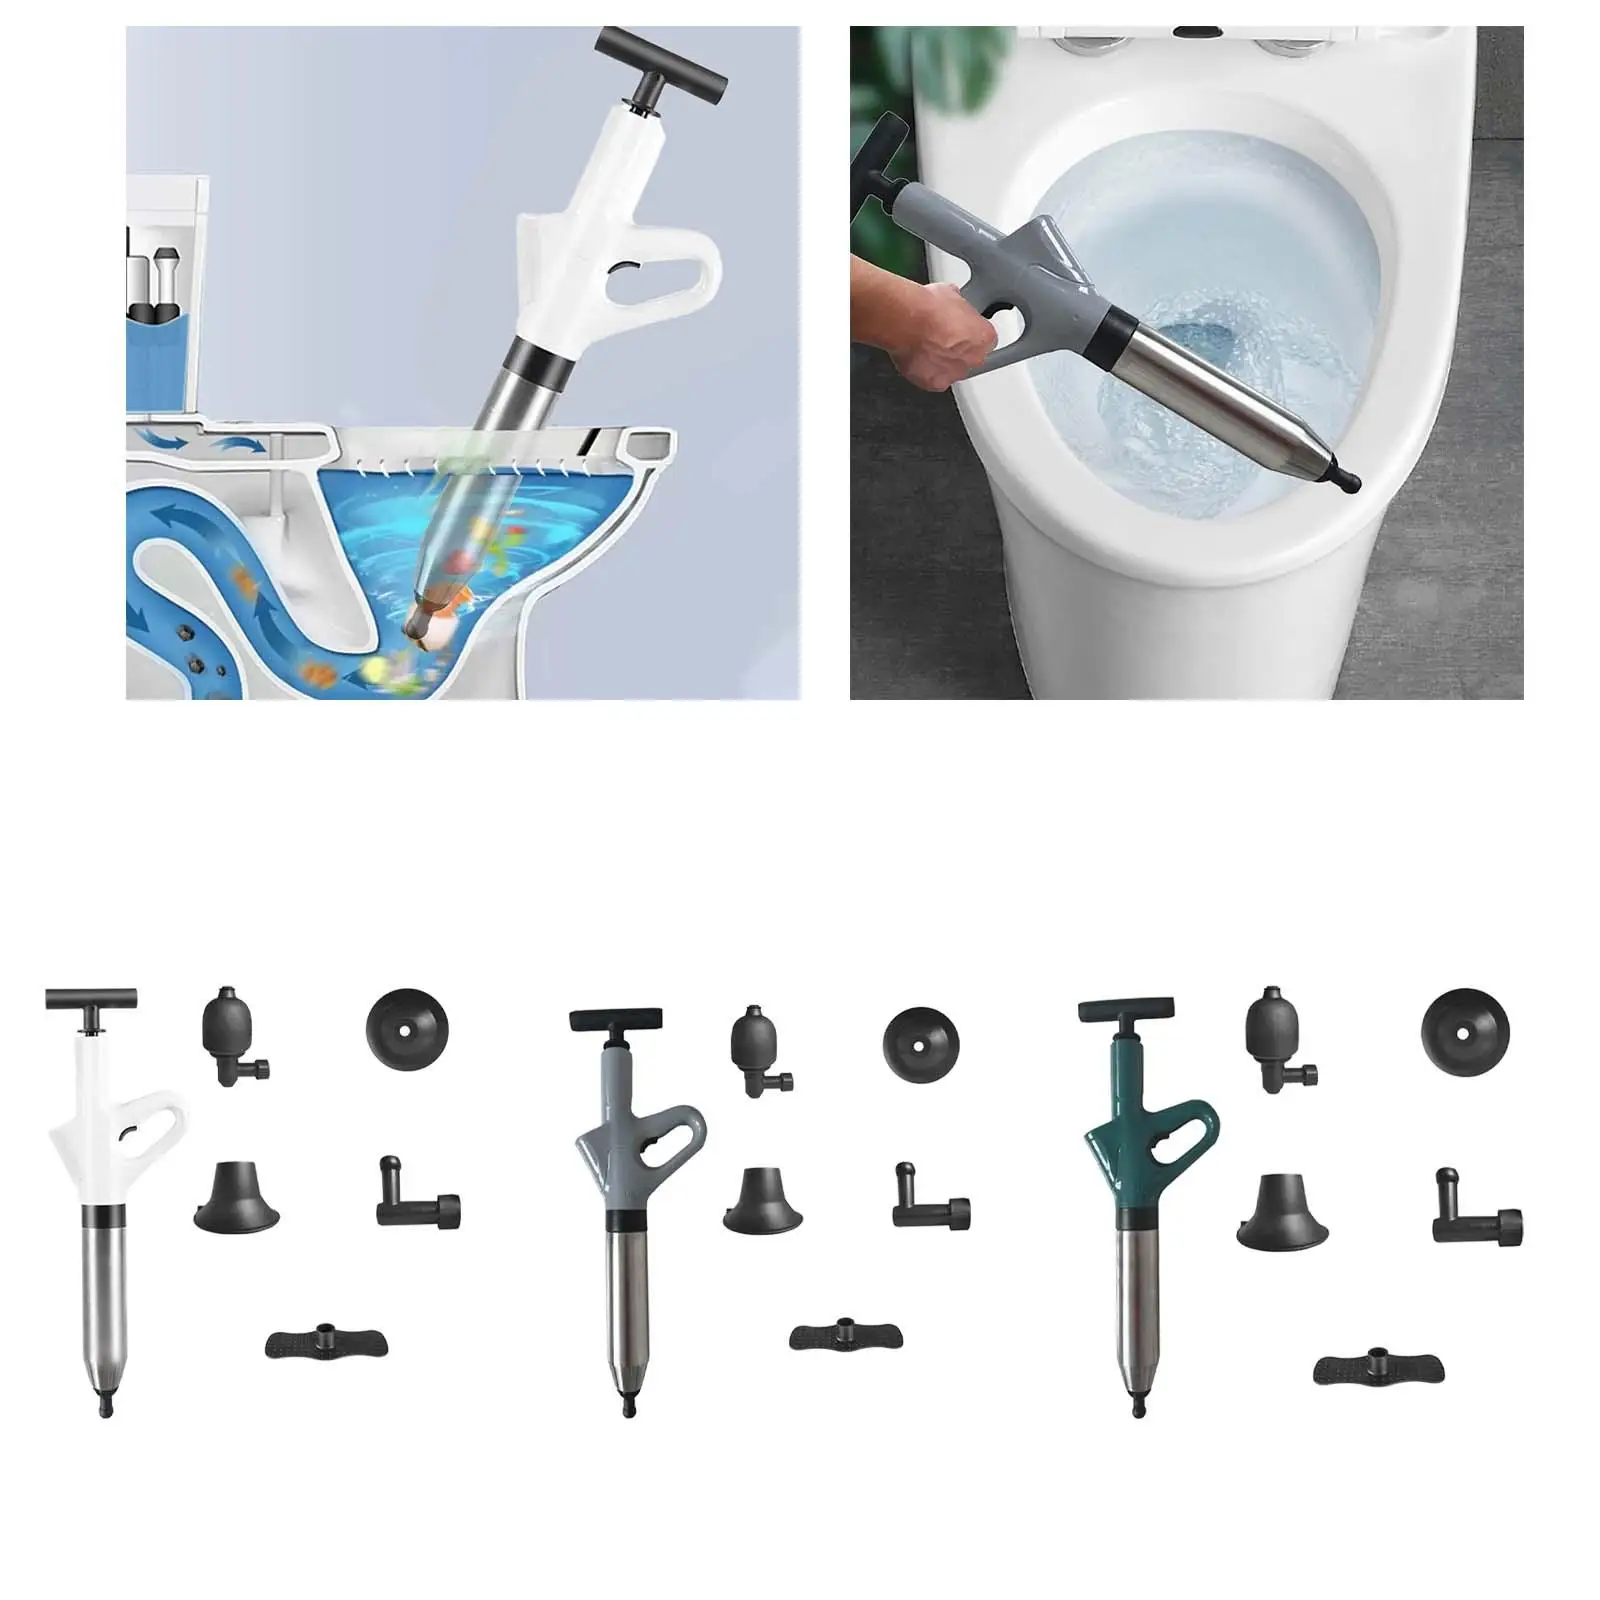 Toilet Air Pressure Plunger Pump with 4 Attachment Head Sink Plungers for Sinks Sewer Kitchen Blocked Pipe Clogged Toilet